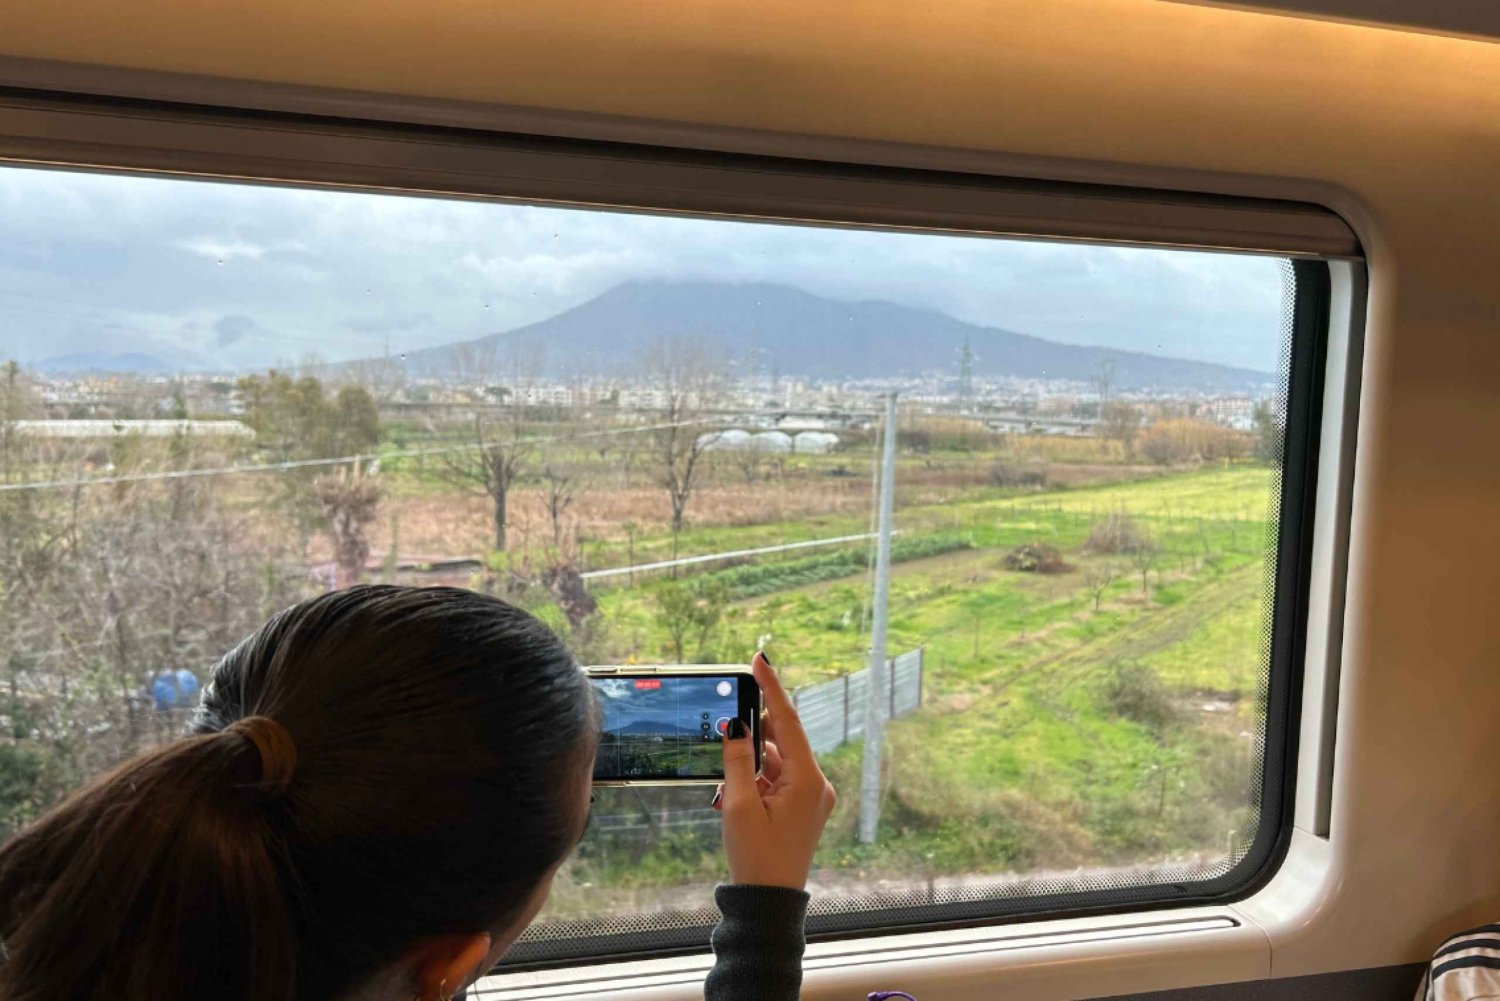 From Rome: Pompeii and Herculaneum Tour w/ High-speed Train